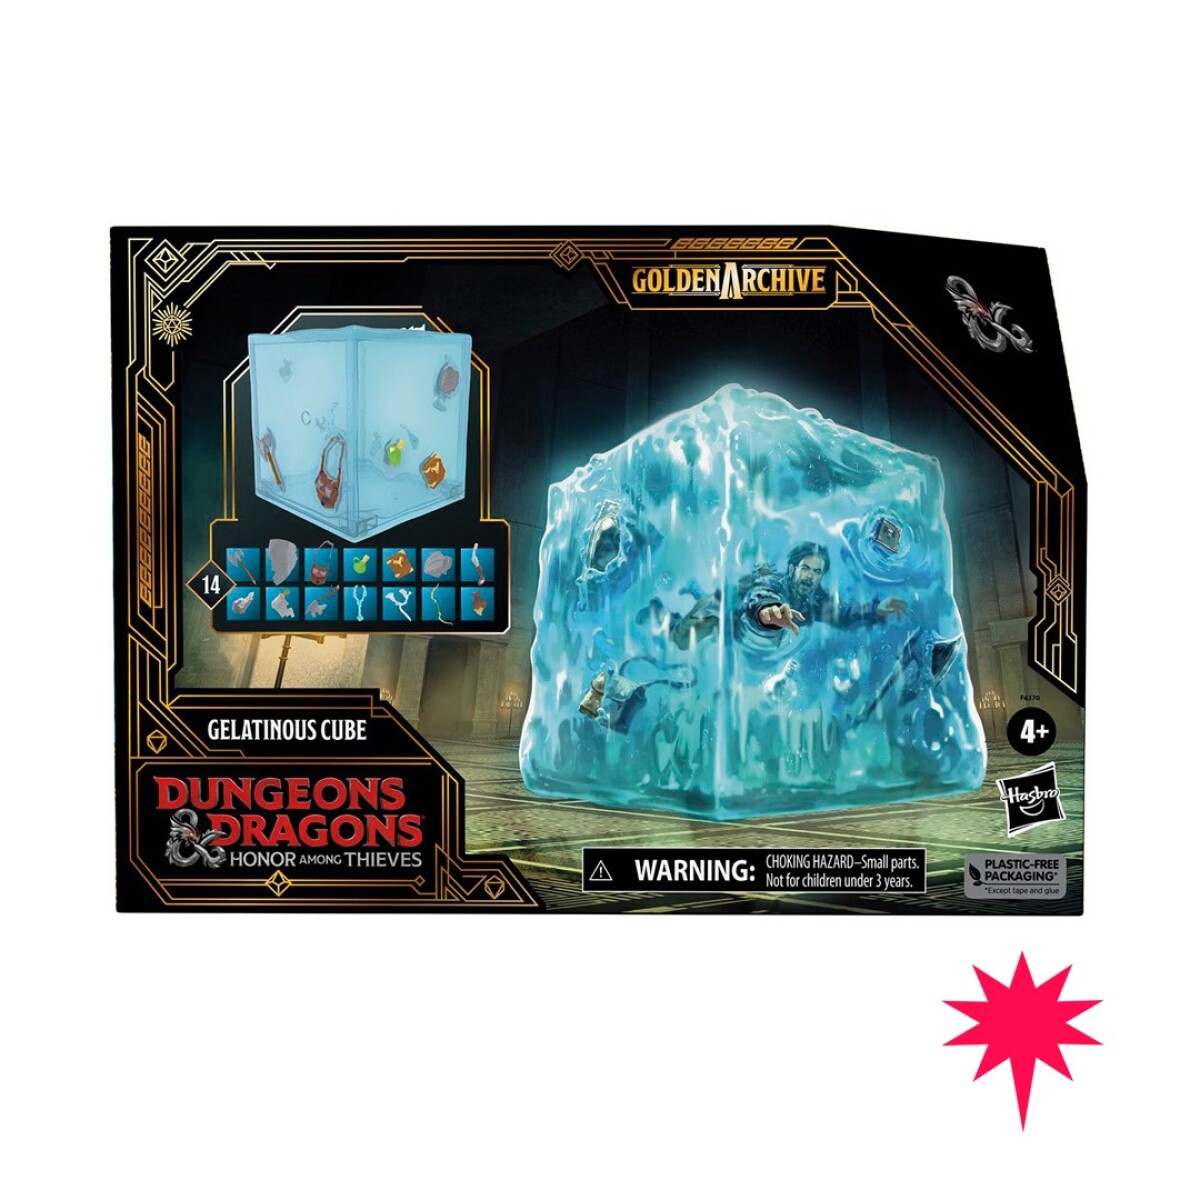 DUNGEONS AND DRAGONS CUBO GELATINOSO 